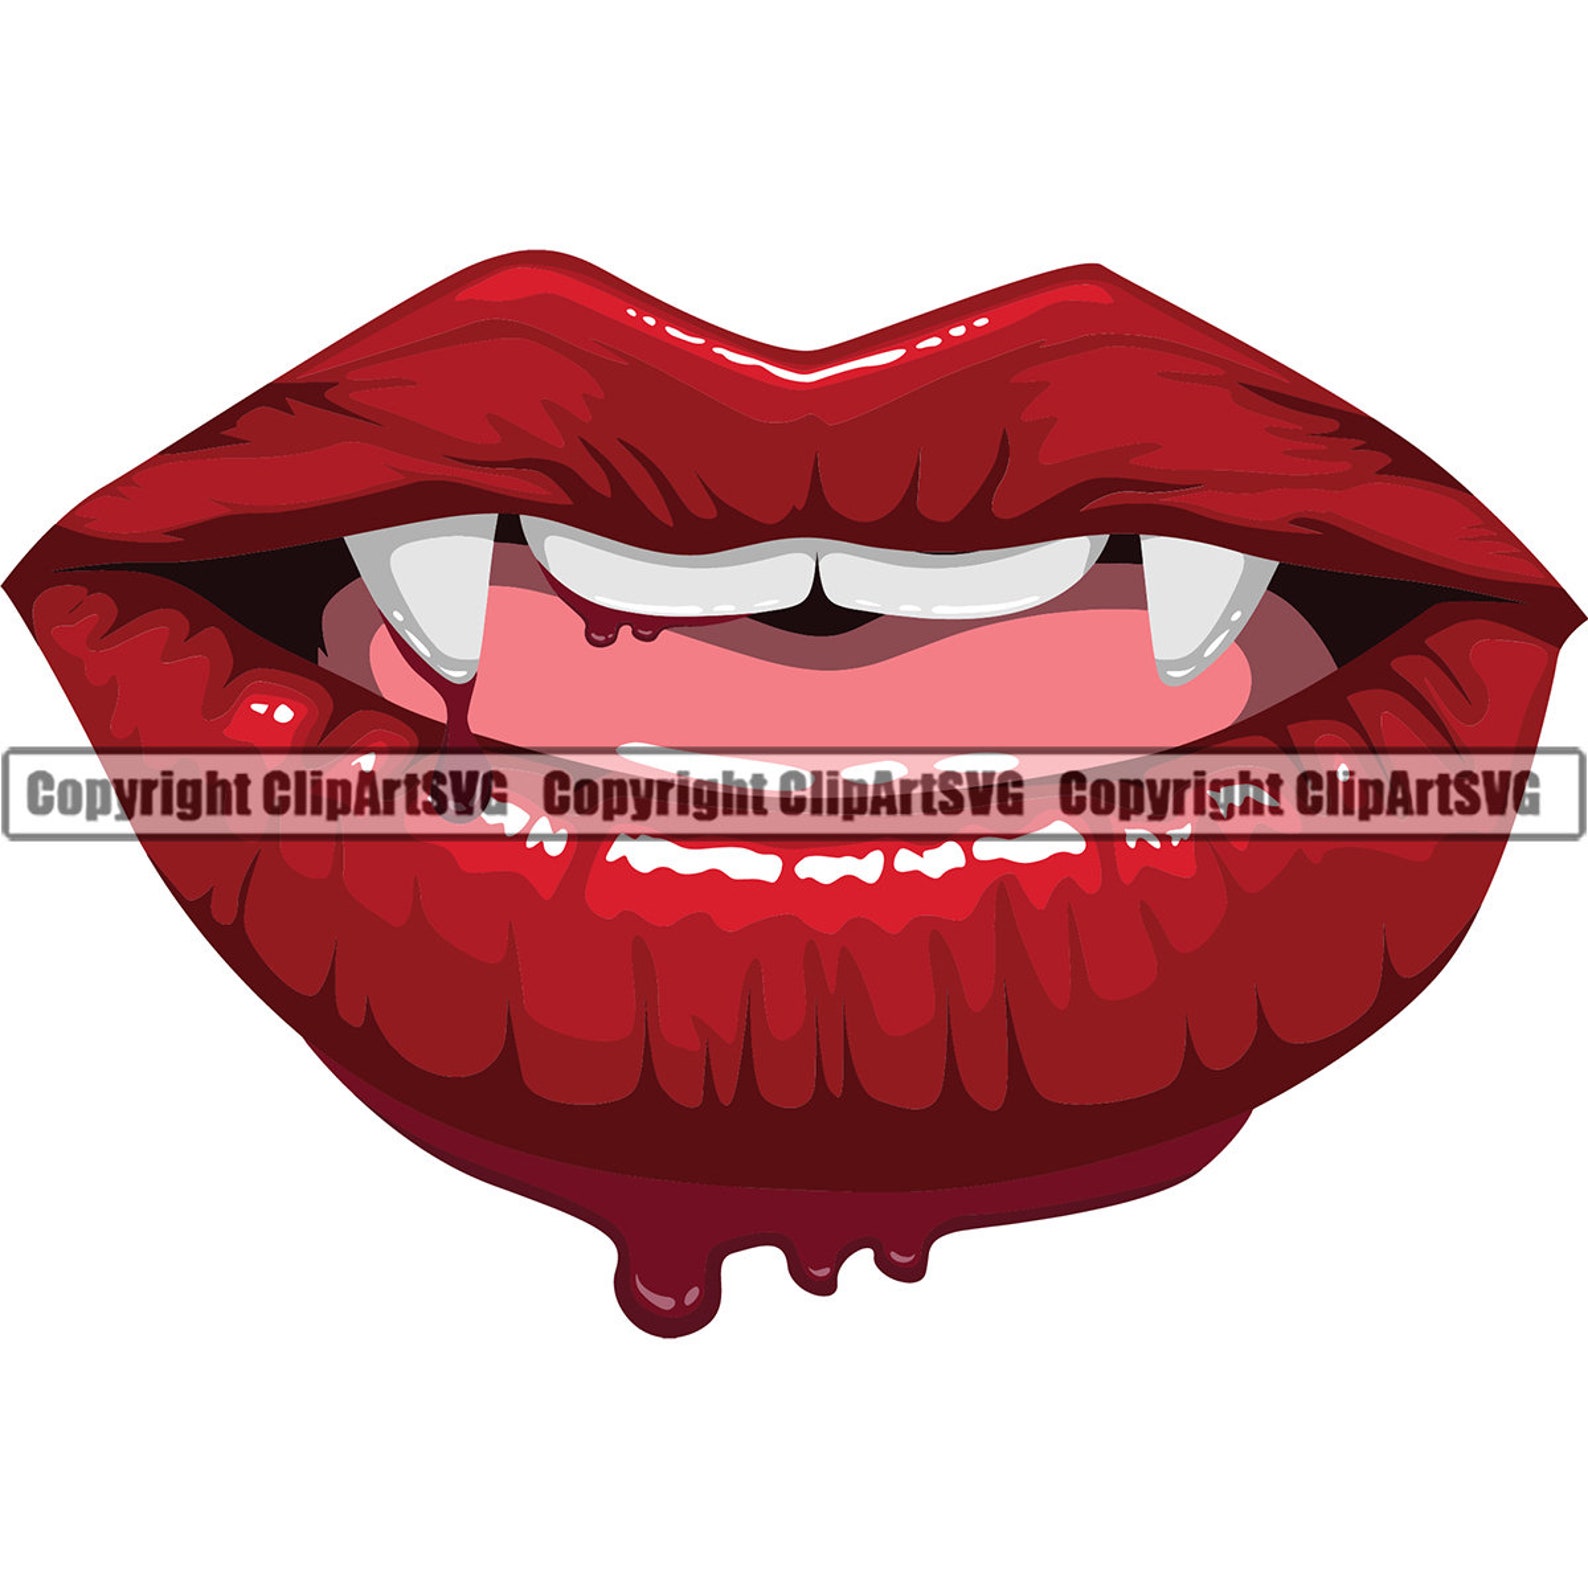 Blood Bloody Lips Mouth Vampire Fangs Bite Injury Wound Kill - Etsy